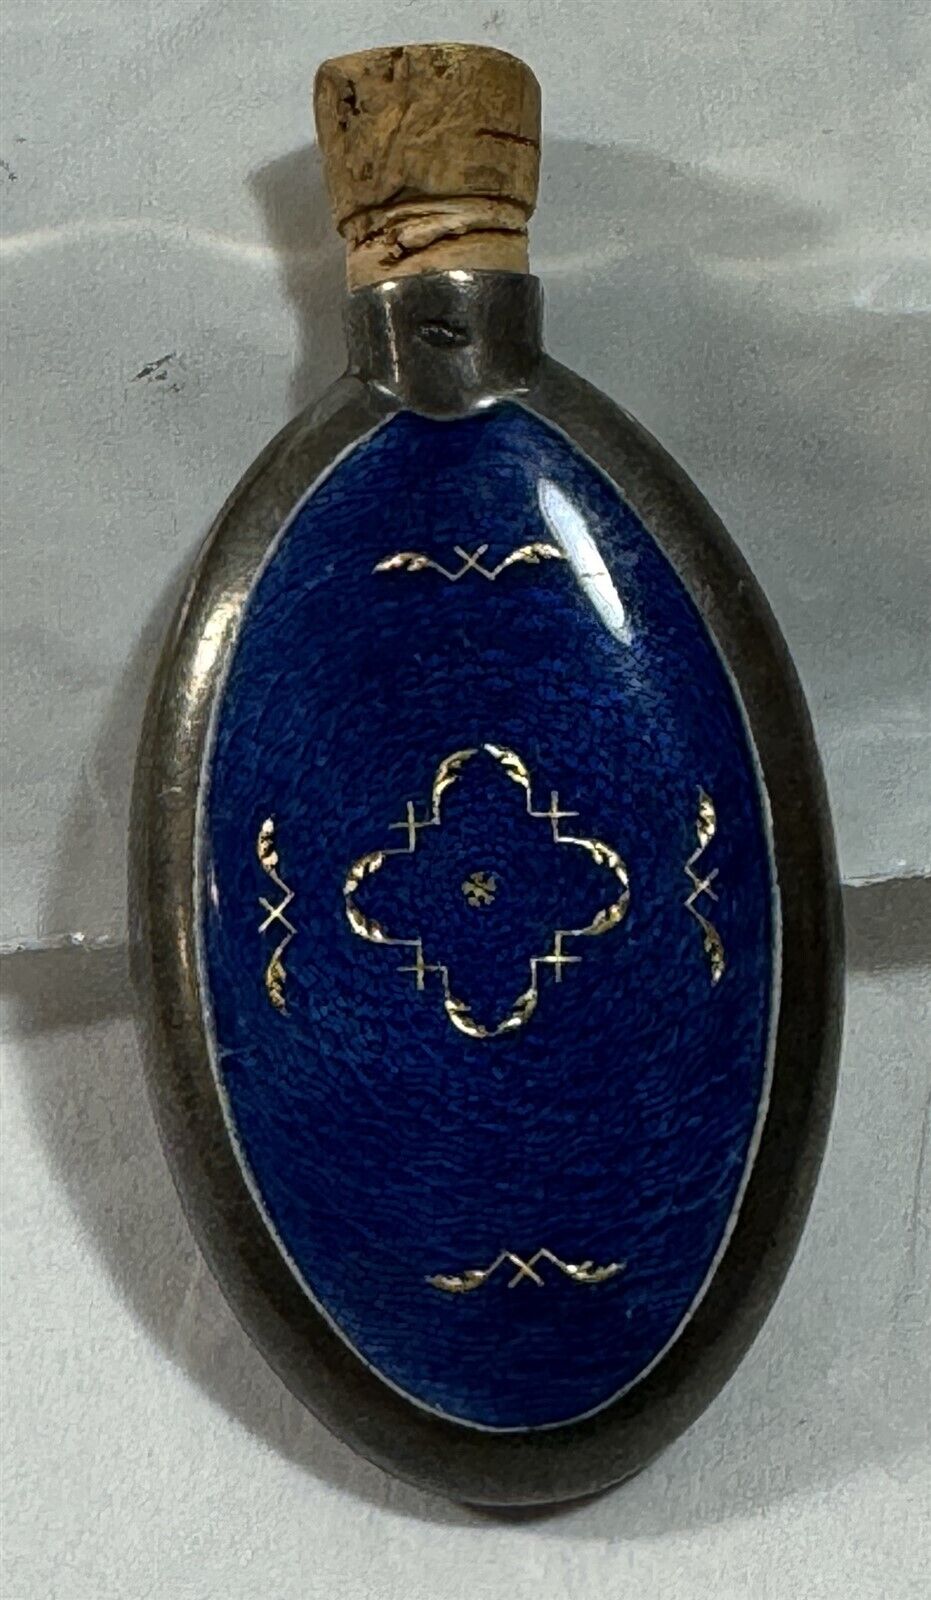 Unique Miniature French Silver and Cobalt Enamel Perfume Bottle Container